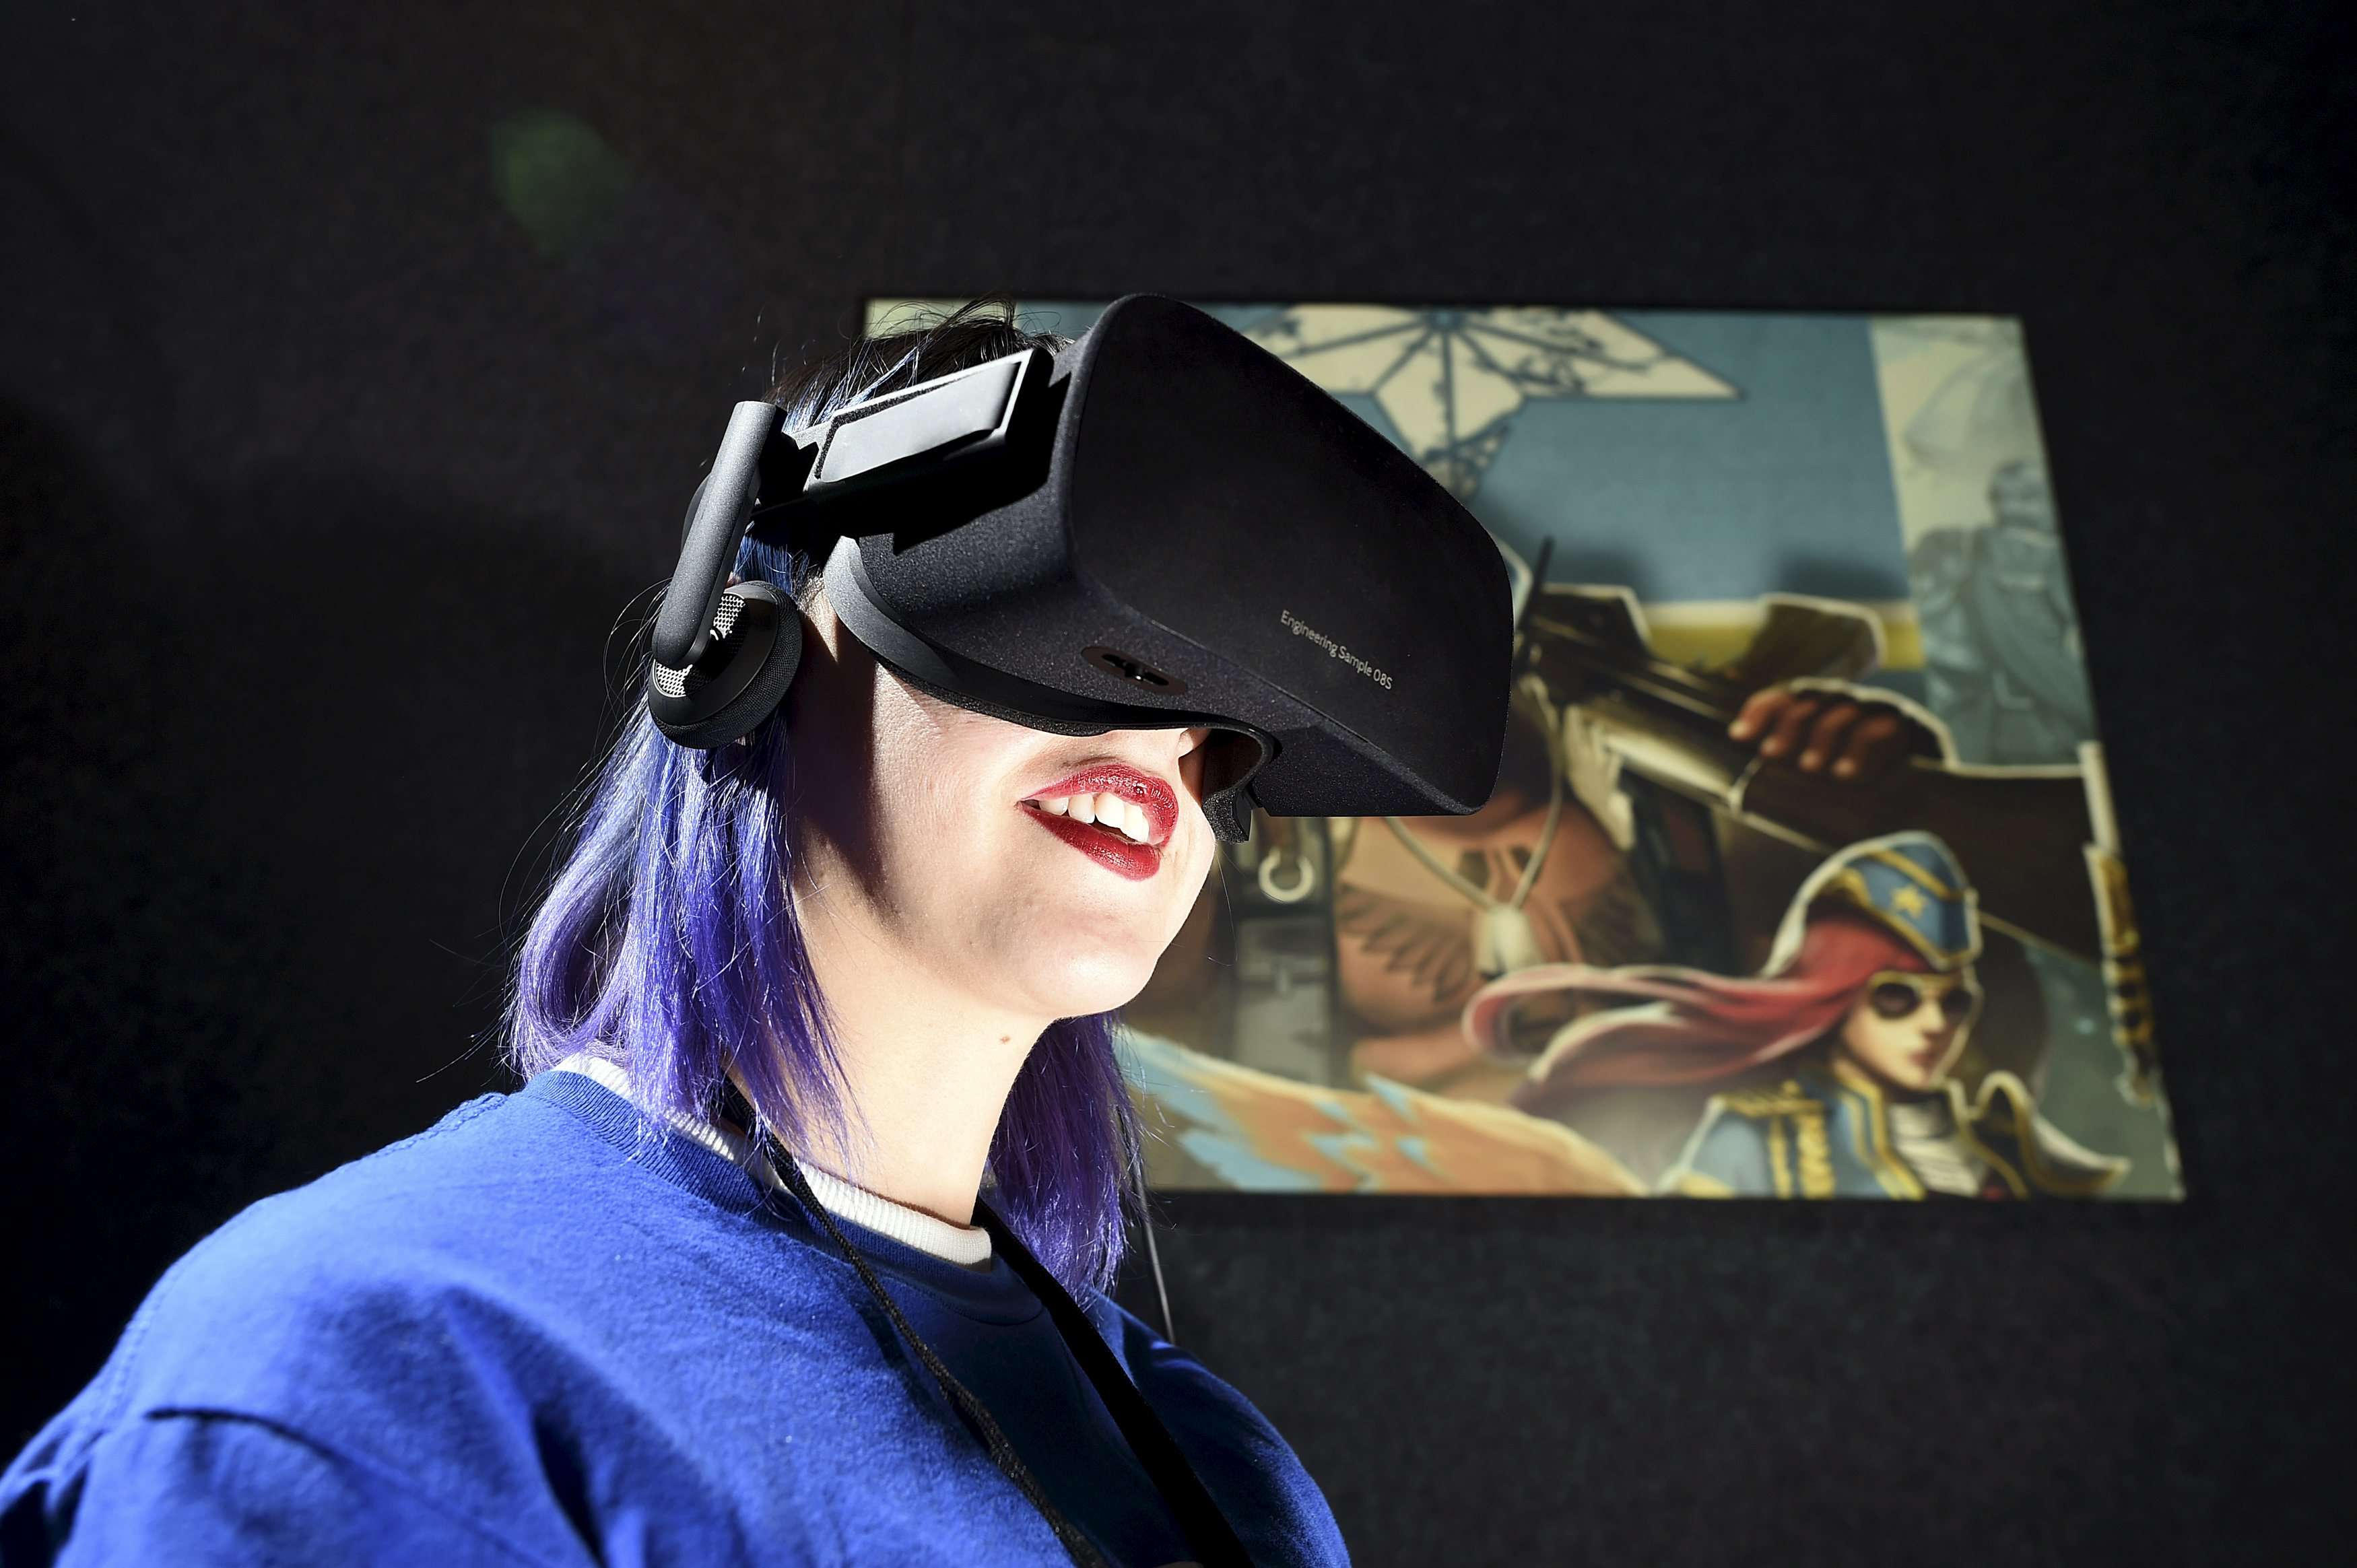 Kaitlyn Innis, a brand ambassador for Oculus, plays "Dragon Front" by High Voltage Software during the Oculus Game Day VR event in San Francisco, California on March 15, 2016. Photo: Reuters